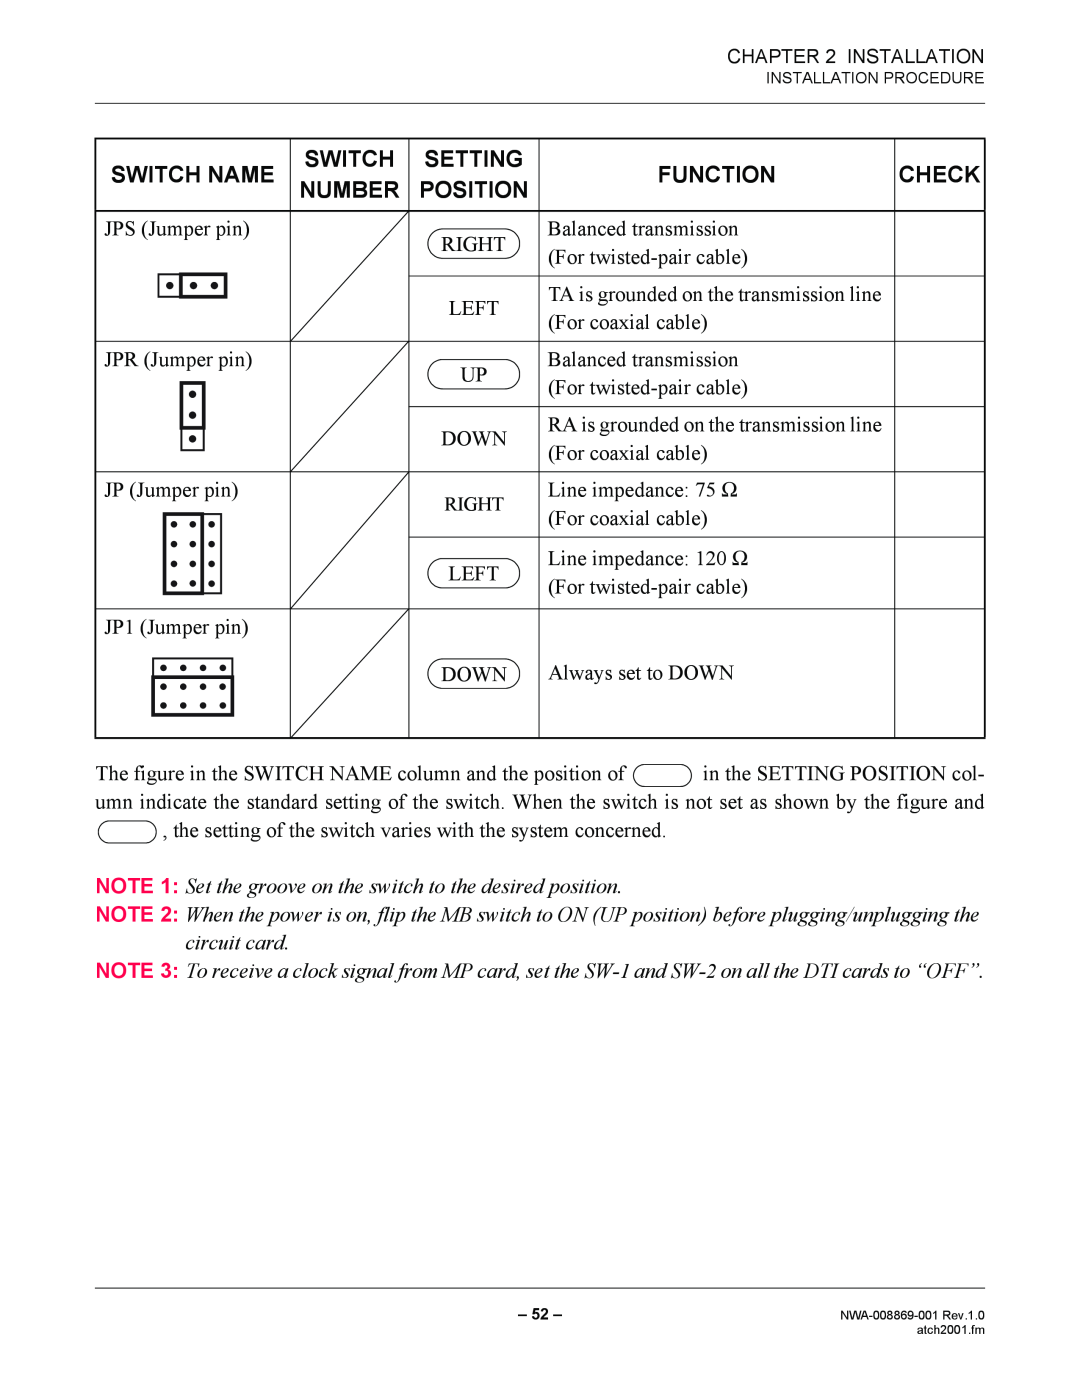 NEC NWA-008869-001 manual Switch Name, Setting, Function, Check, Number, Position 